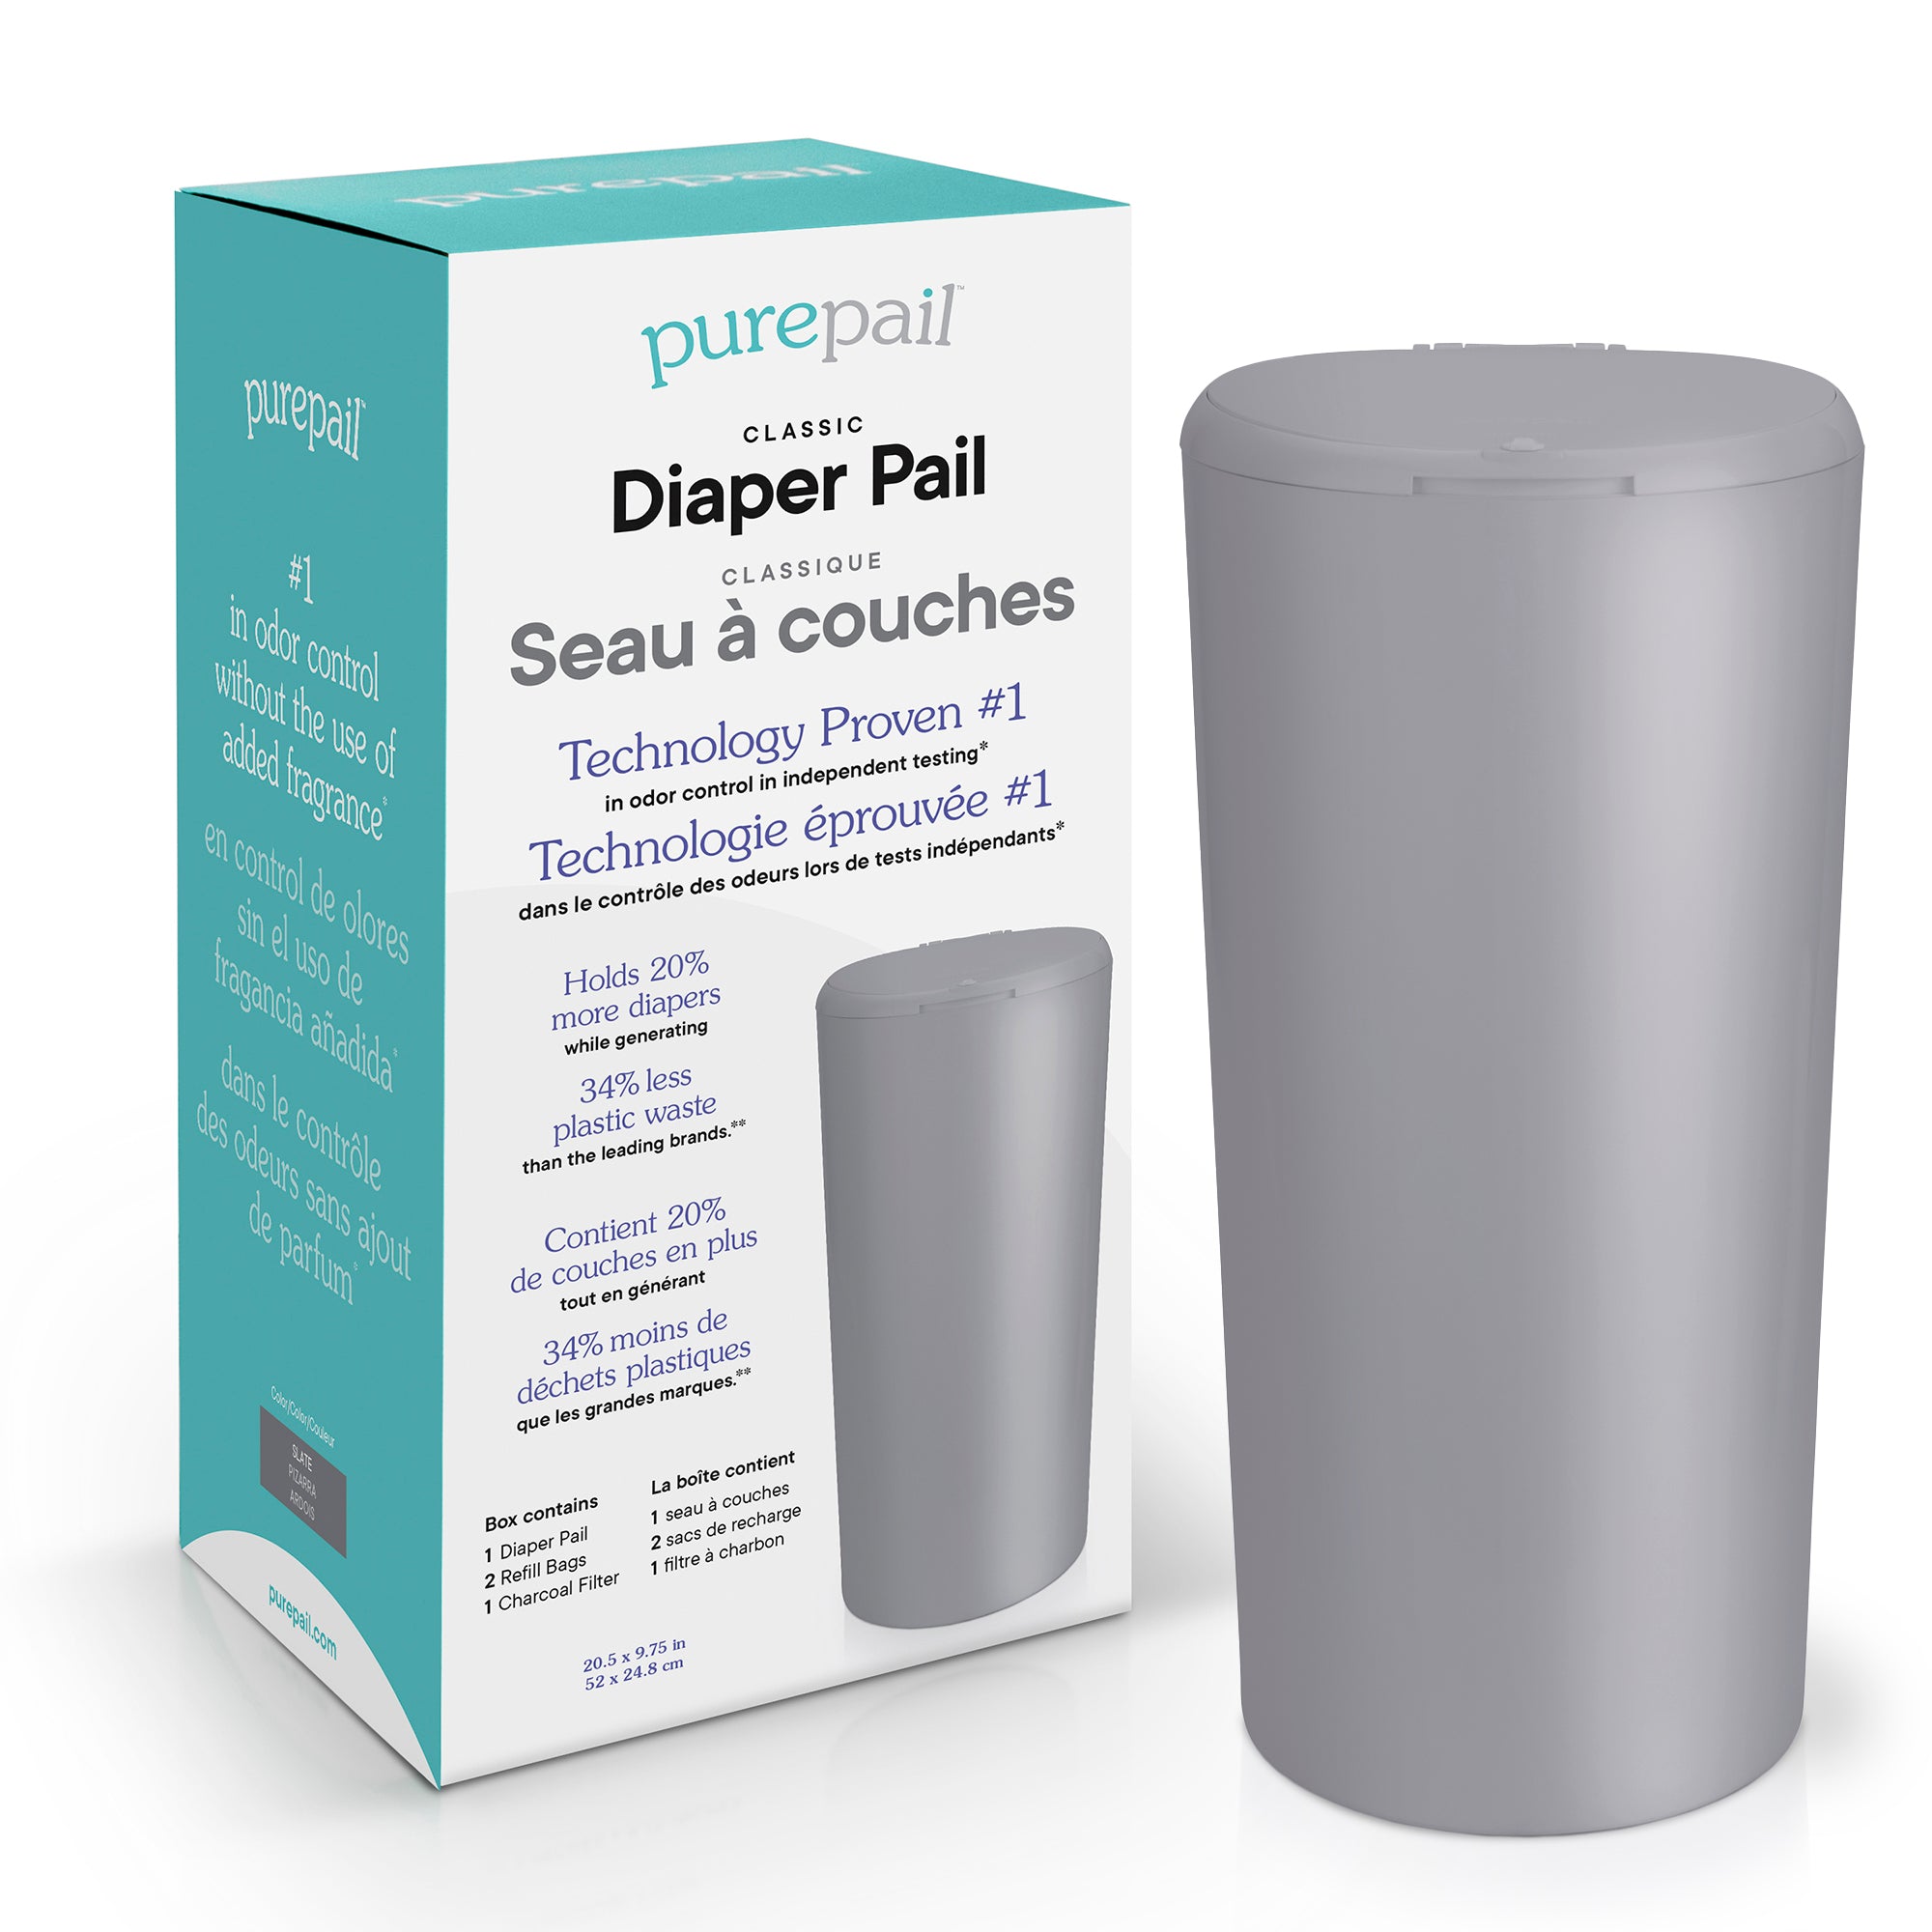 PurePail Classic Slate Diaper Pail Shown With Packaging